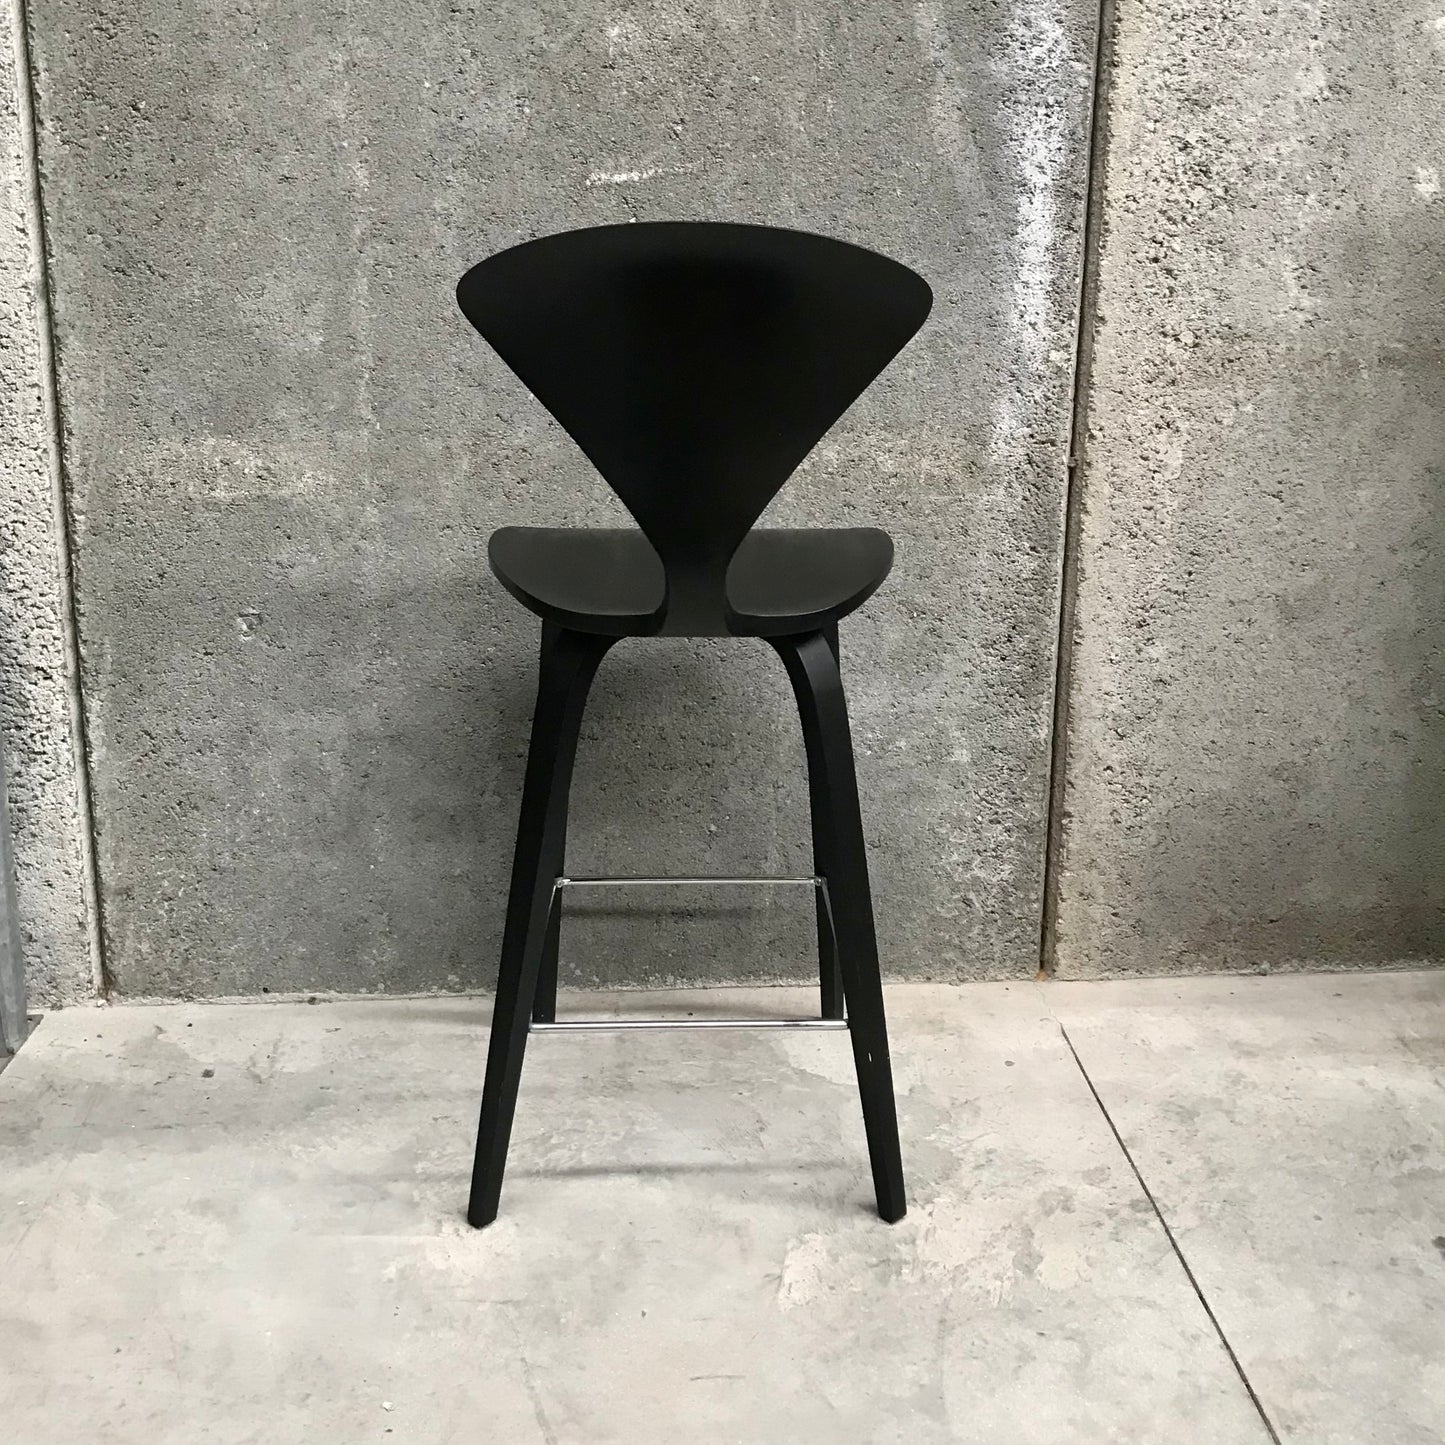 Cherner Counter Stool by Norman Cherner for Cherner Chair Company (4 available)